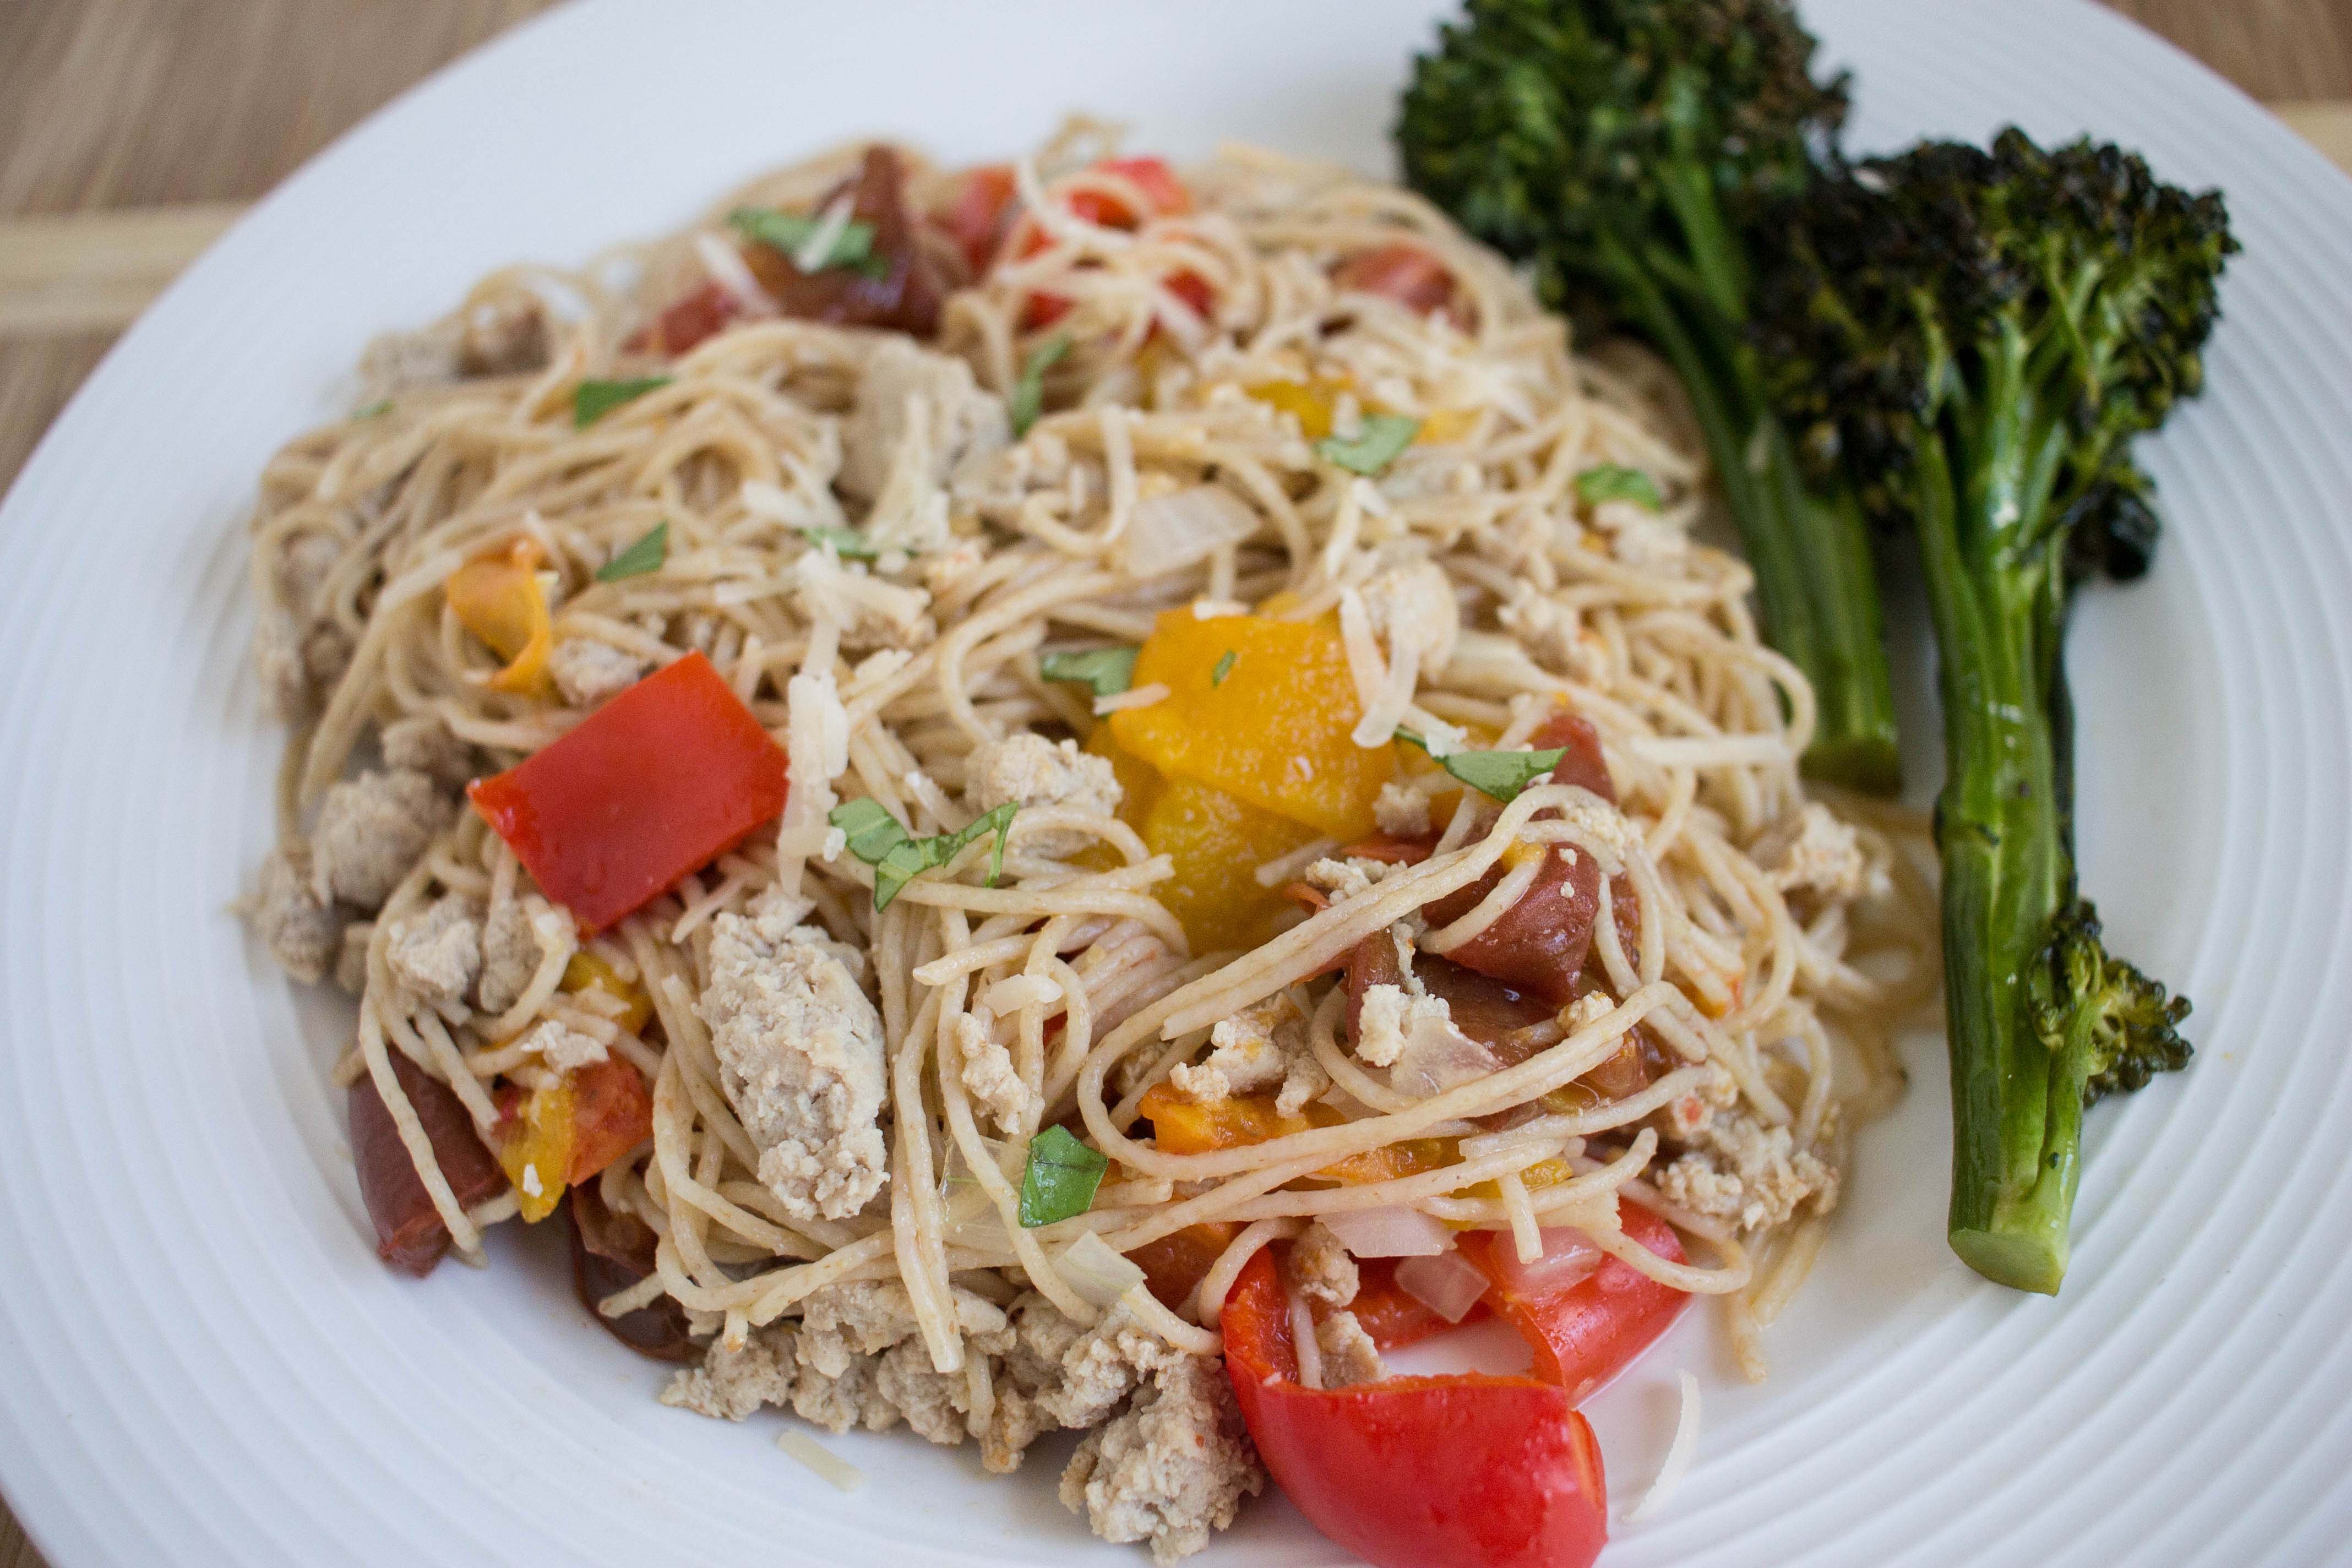 Ground Turkey and Roasted Heirloom Tomatoes and Broccolini